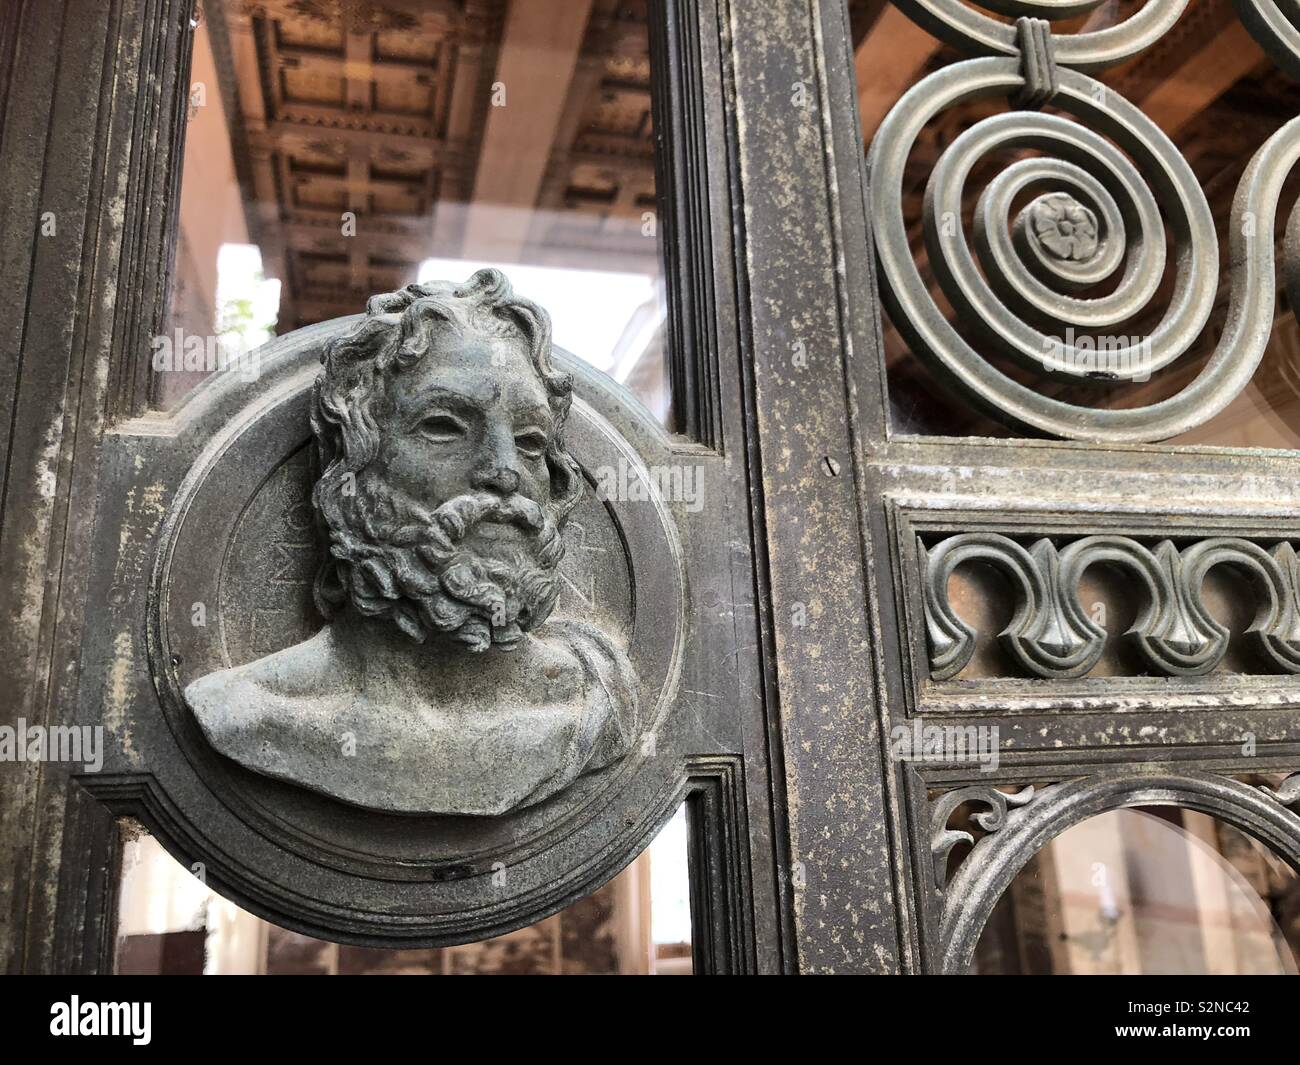 Decorative Bronze decorative casting, part of a door in Villa Kerylos, looking into one of the rooms, featuring a Greek god and spiral and other decorative designs. Stock Photo